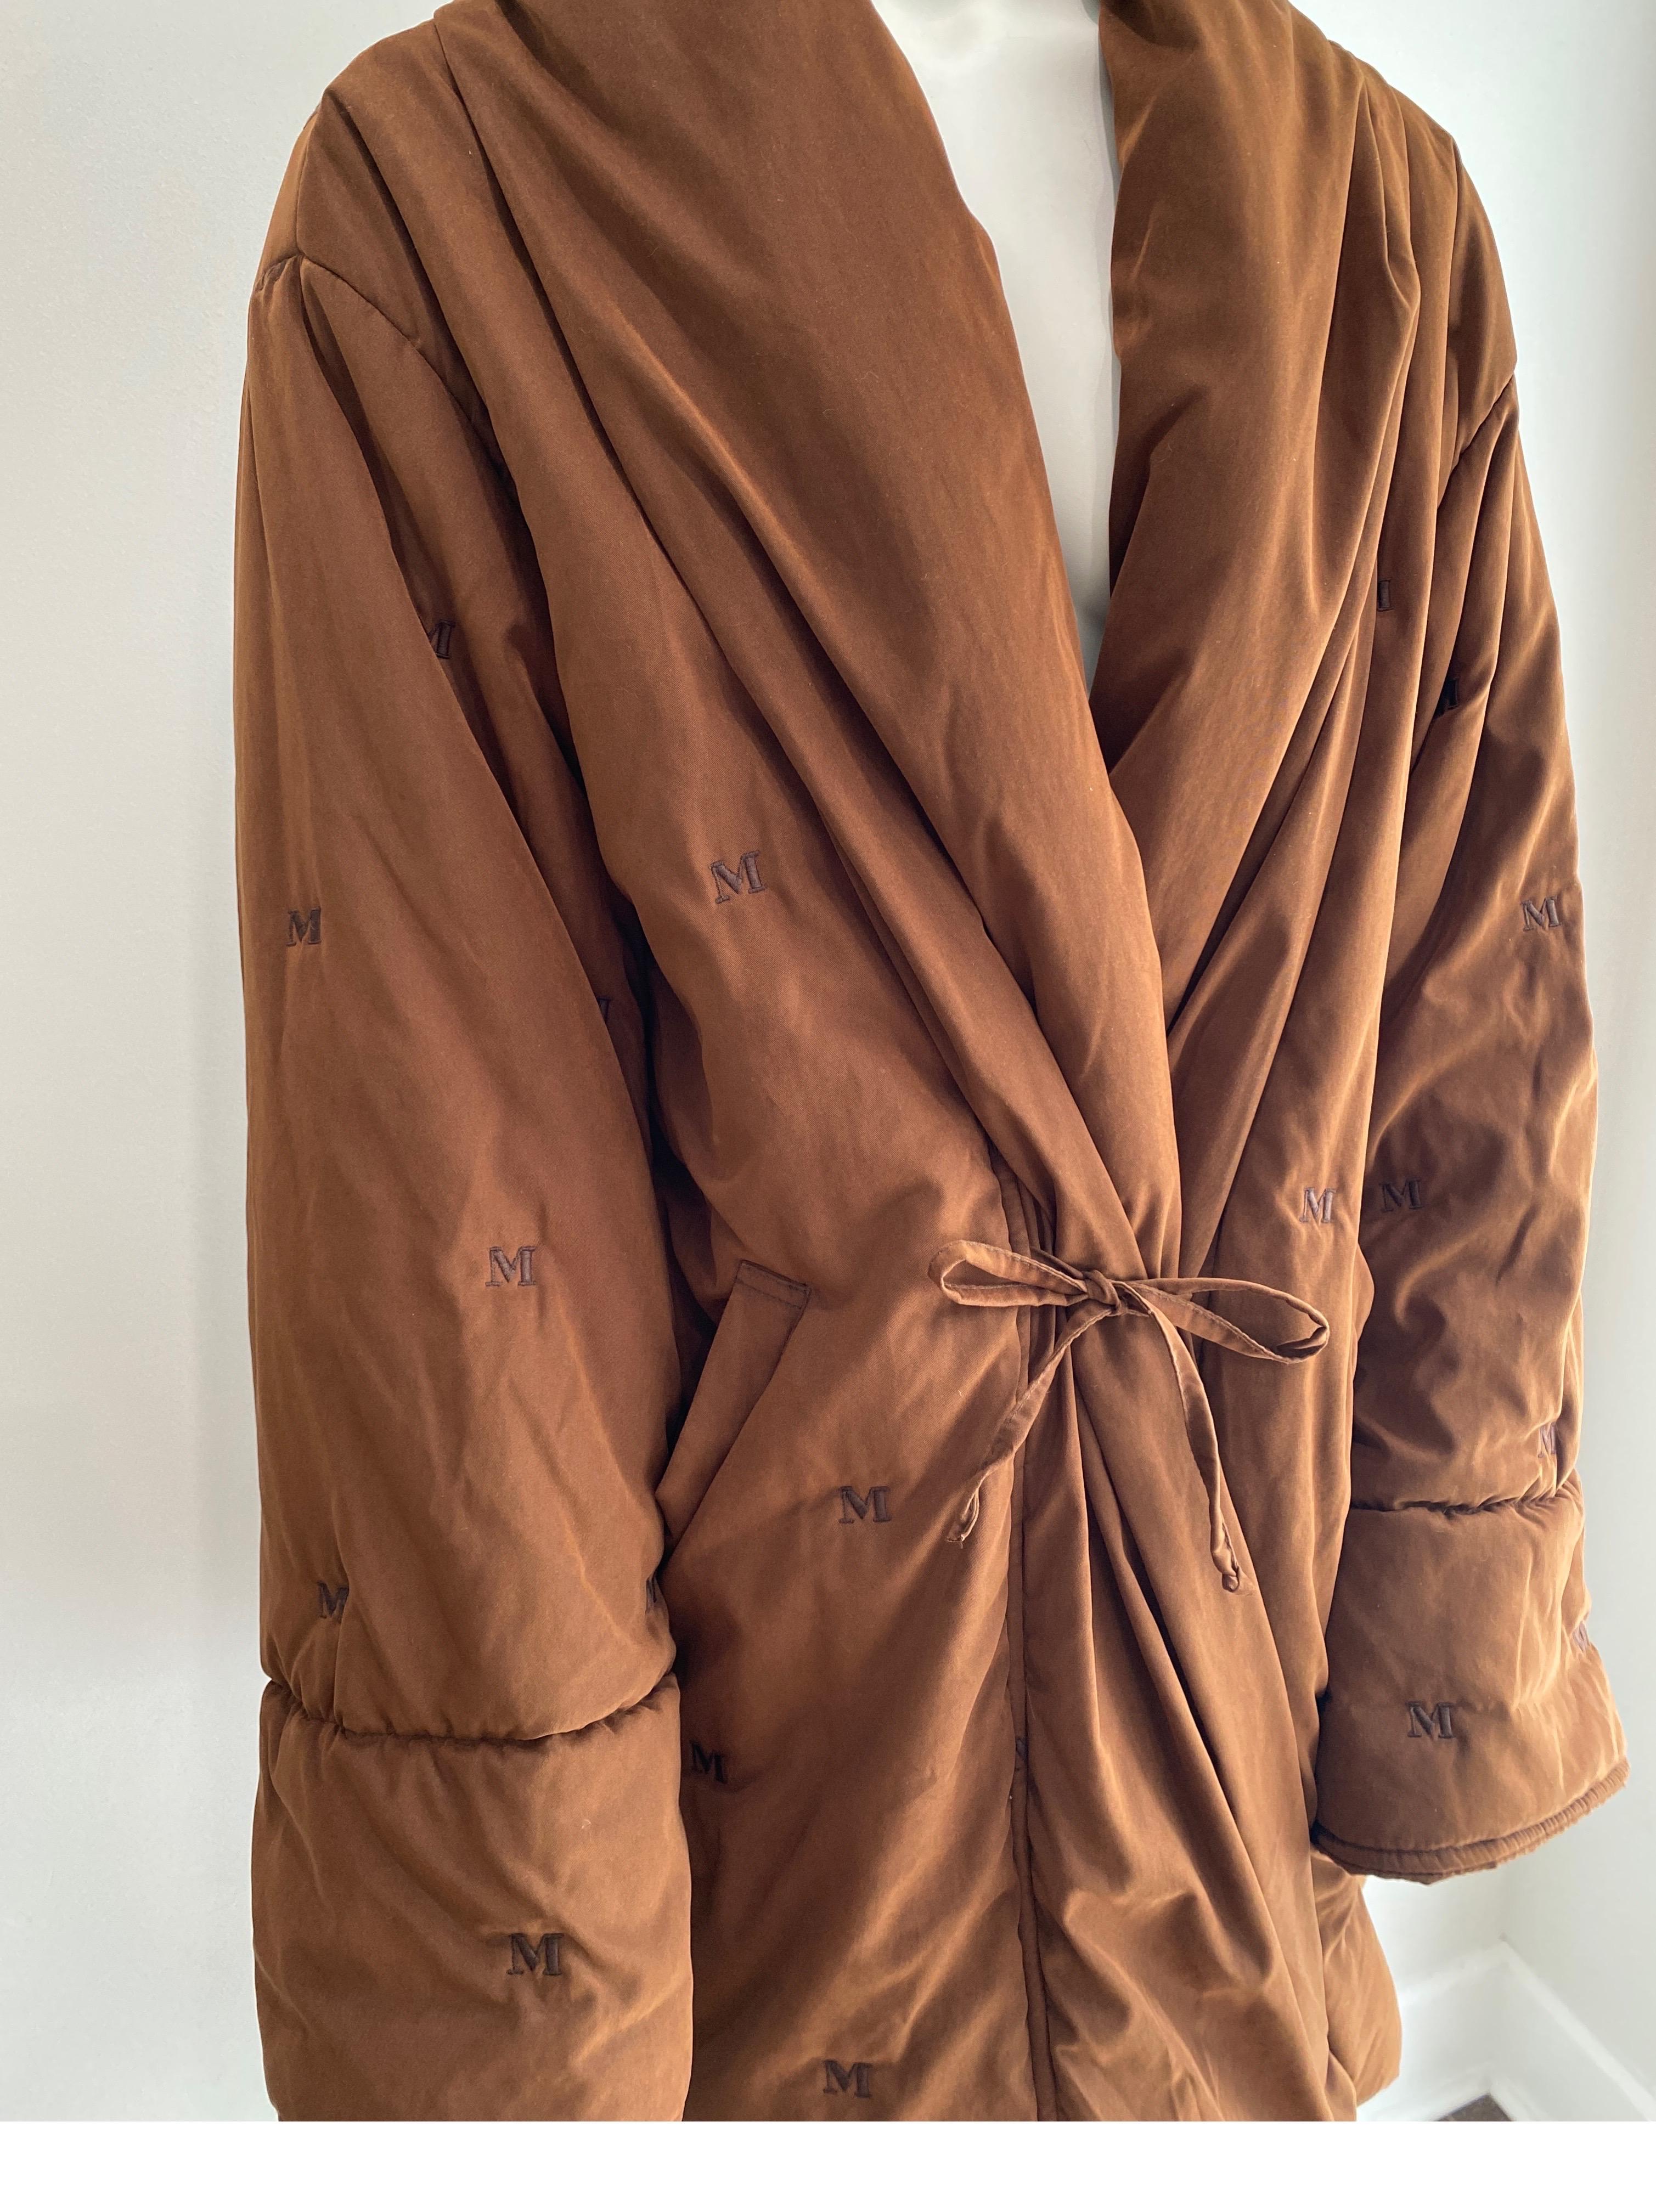 MaxMara Vintage 1990's Brown Embroidered Oversized Puffer Coat - US Size 6. This oversized, lined puffer coat has the M embroidered throughout the fabric. It has a slight crossover in the front along with a tie closure, drop sleeve, two front side